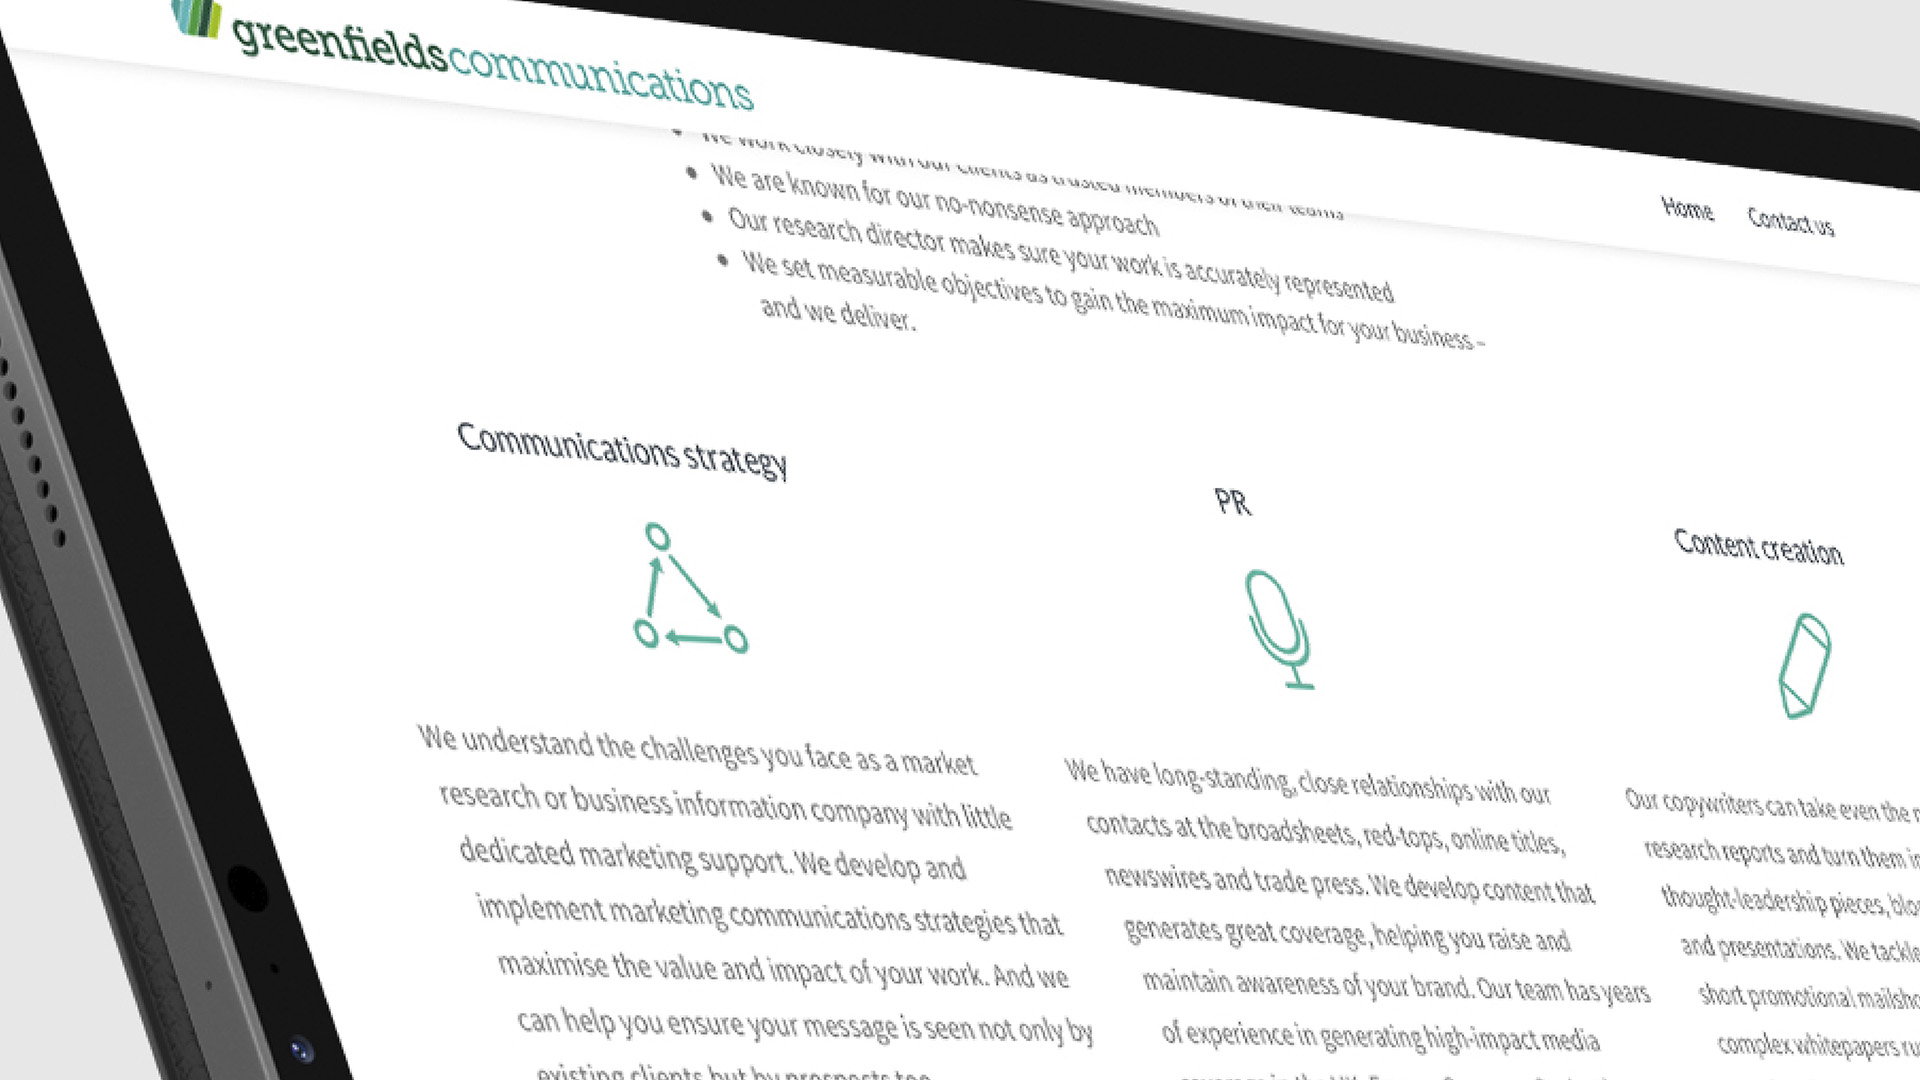 A section of the Greenfields Communications Website showing the Services Icons with text